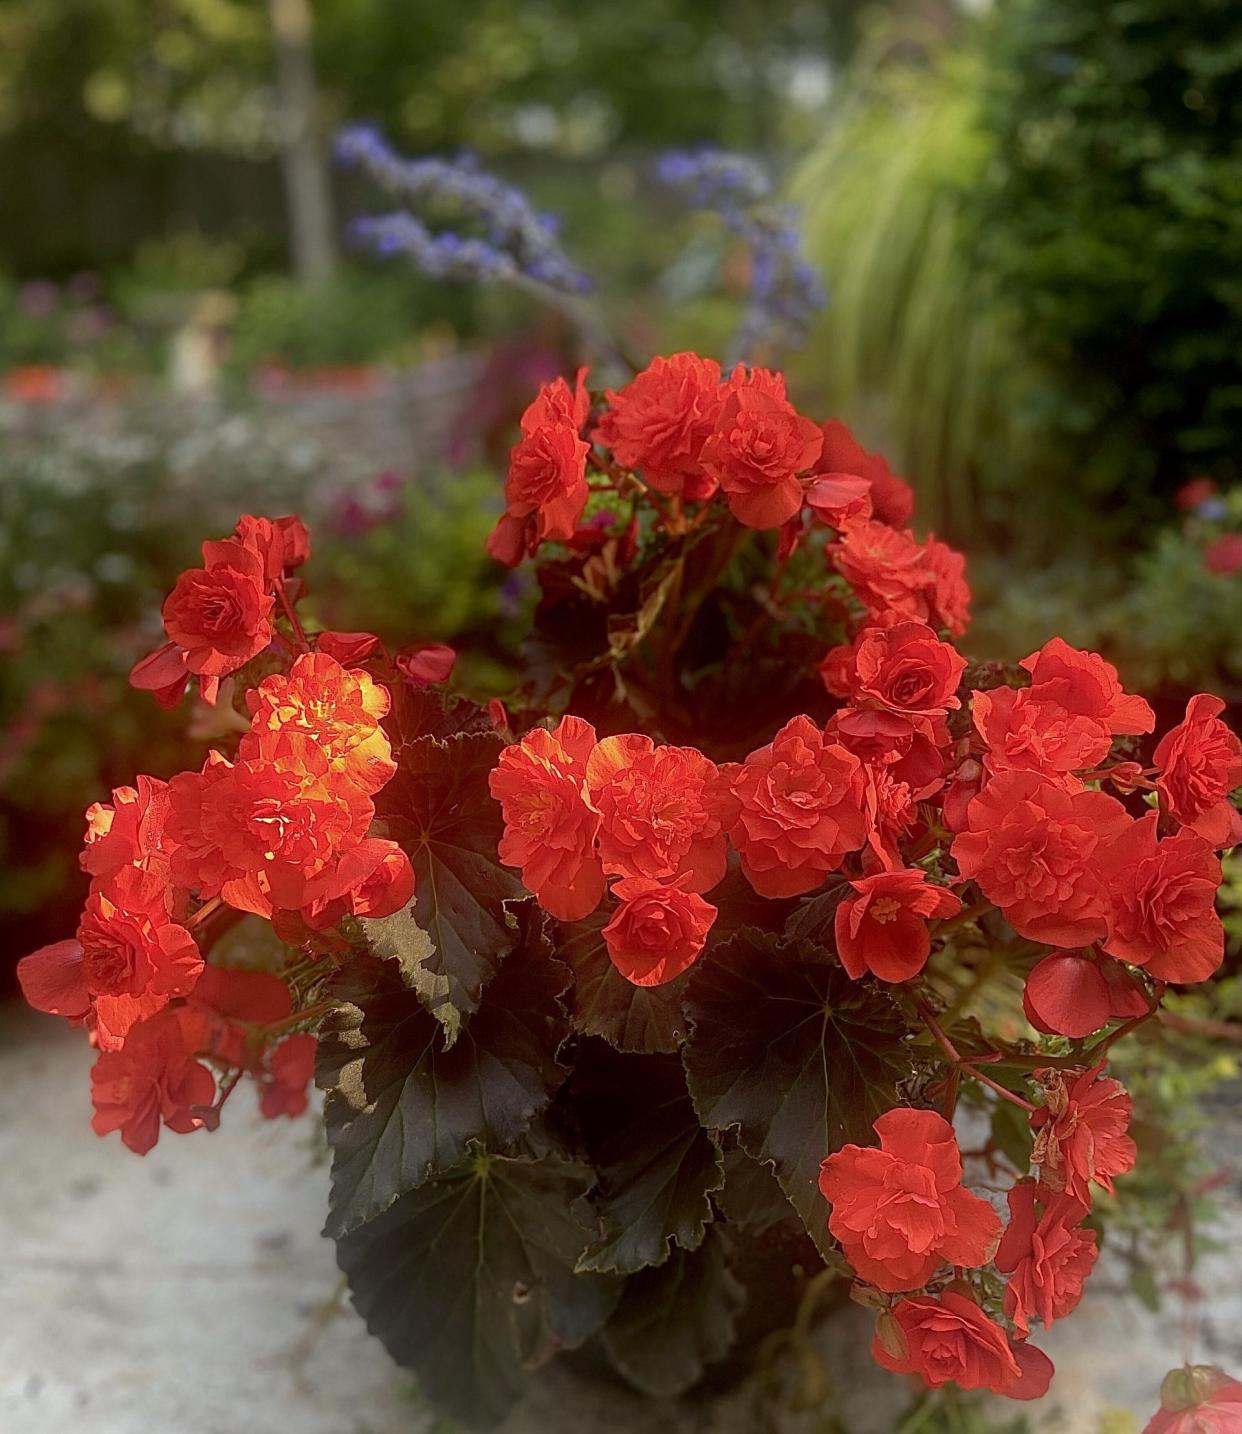 Solenia begonias known as Rieger begonias open up a new world of art and elegance to the mixed container. Here Solenia Chocolate Orange looks like an old-world painting with its large rose shaped blossoms.